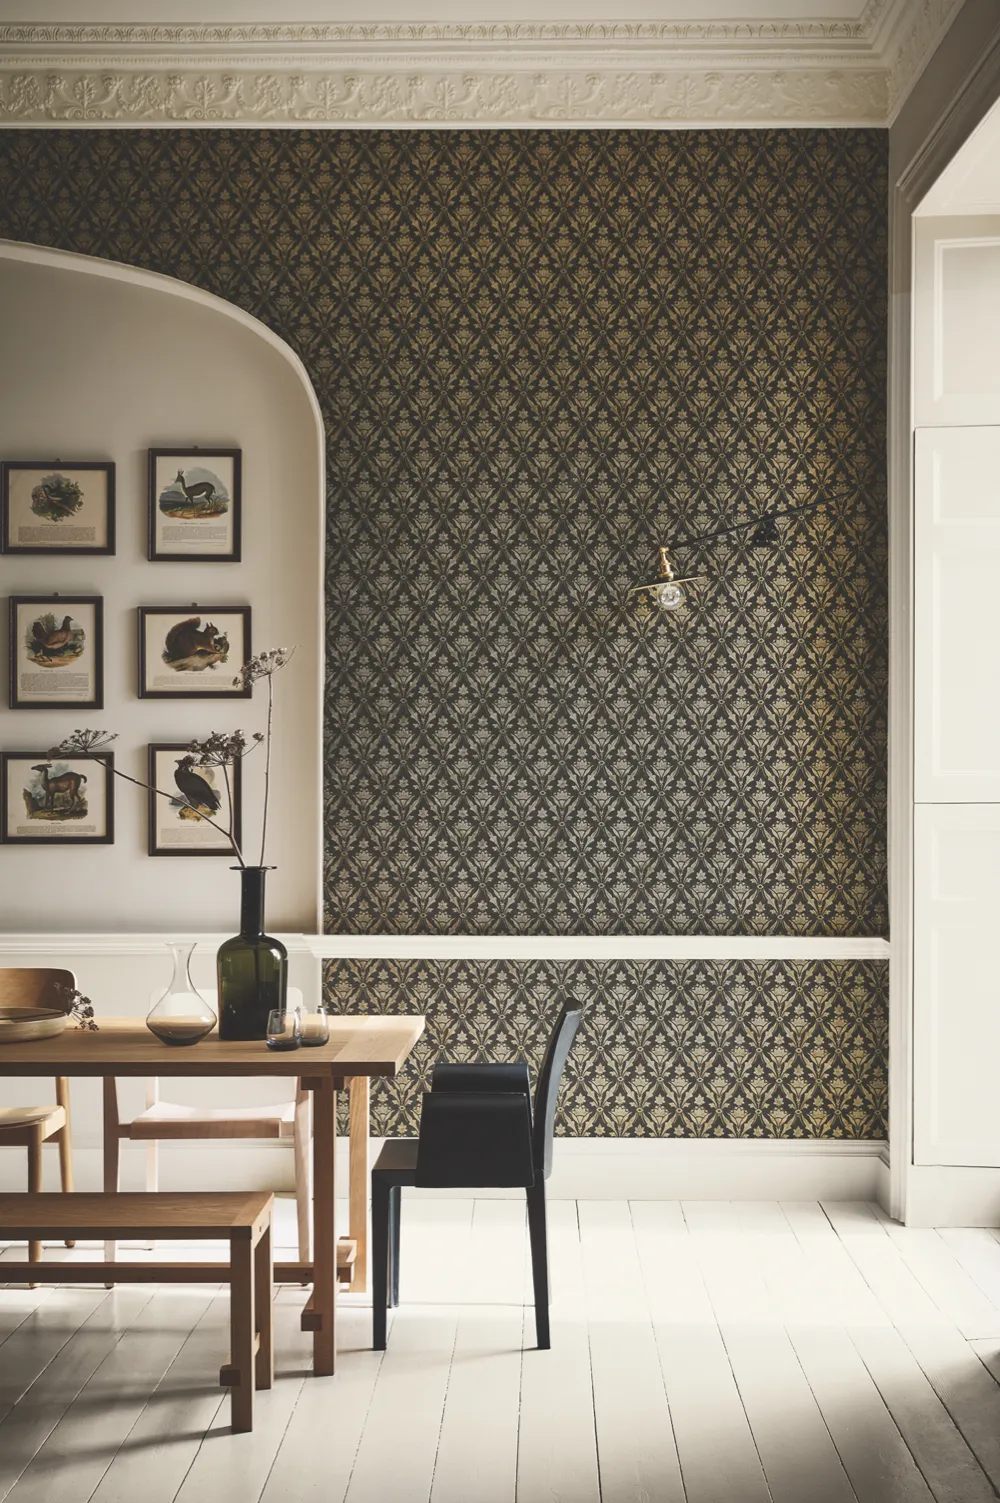 Archive designs with proven longevity have an authentically timeless look. ‘Borough High St’ wallpaper in ‘Stamp’, £86 per roll, London Wallpaper IV collection, Little Greene